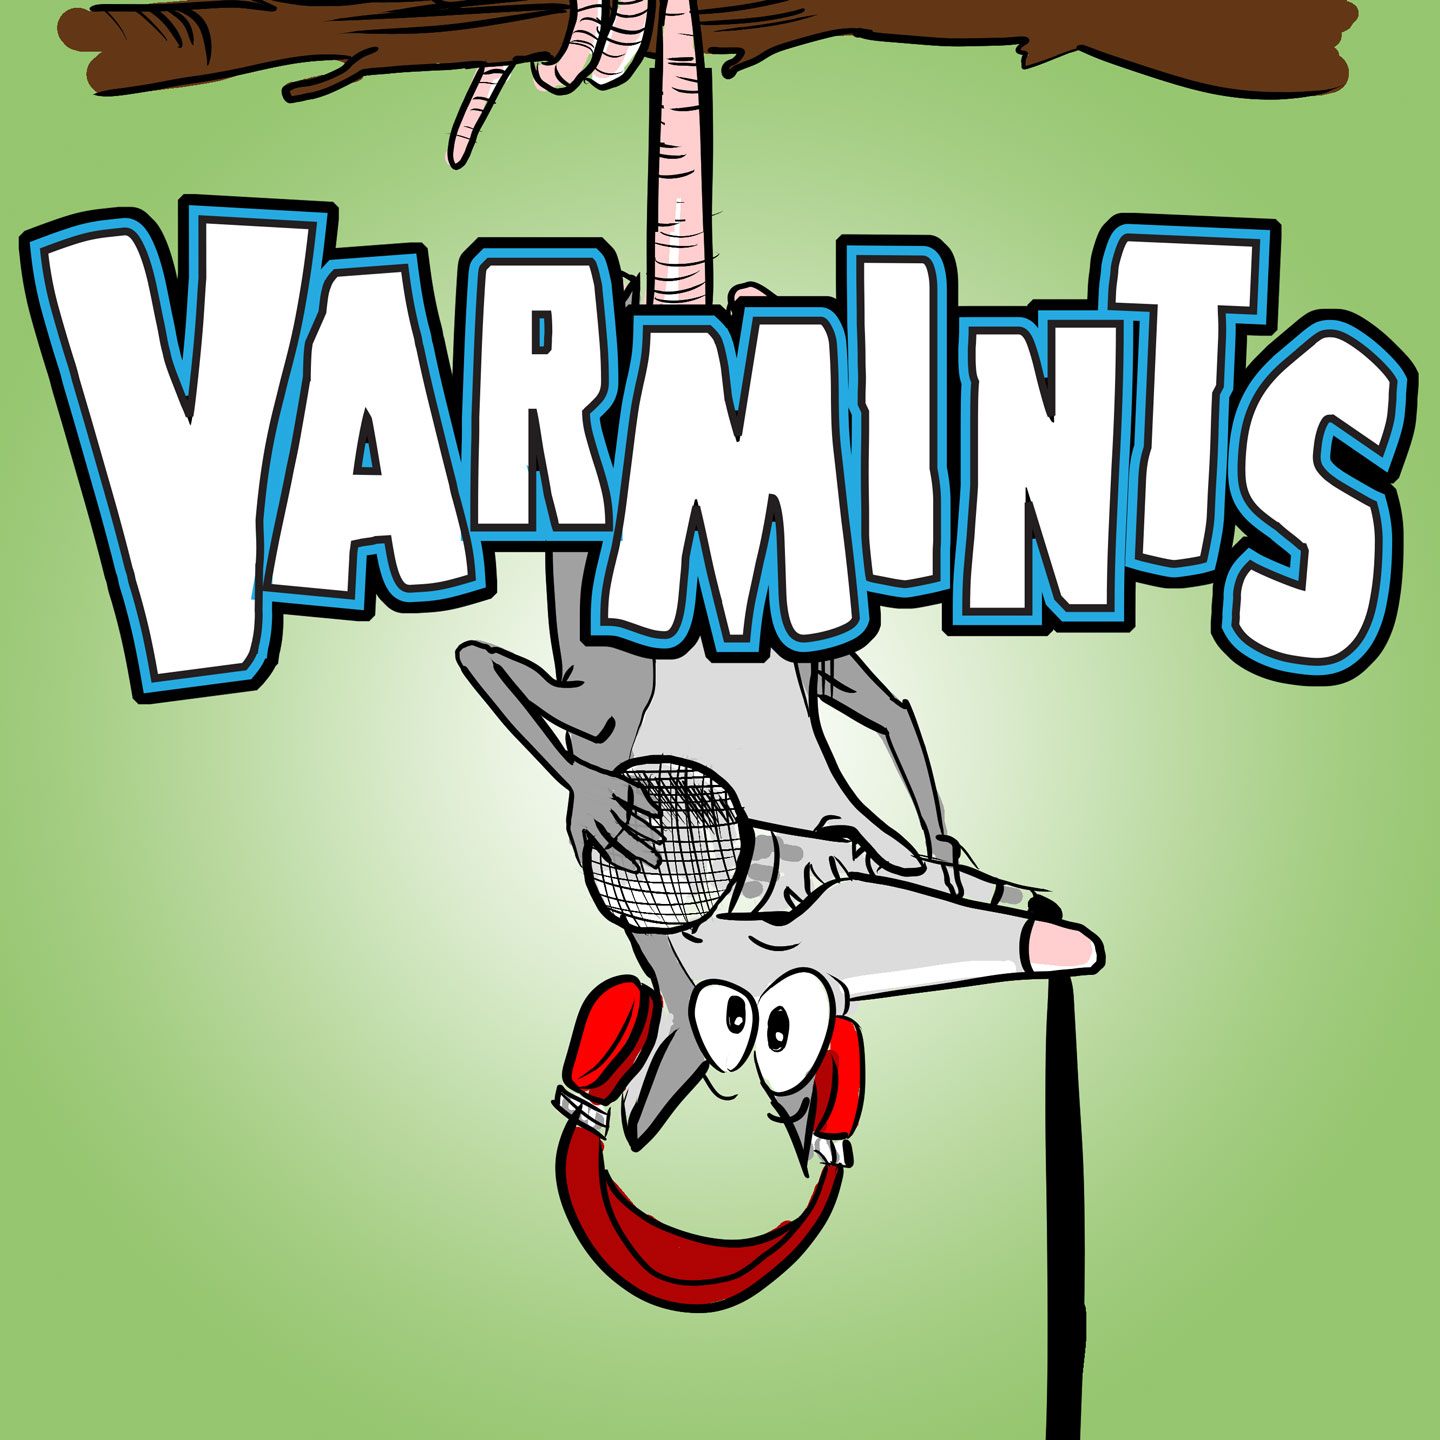 Varmints! (2.0) What’s happening, and what is next?